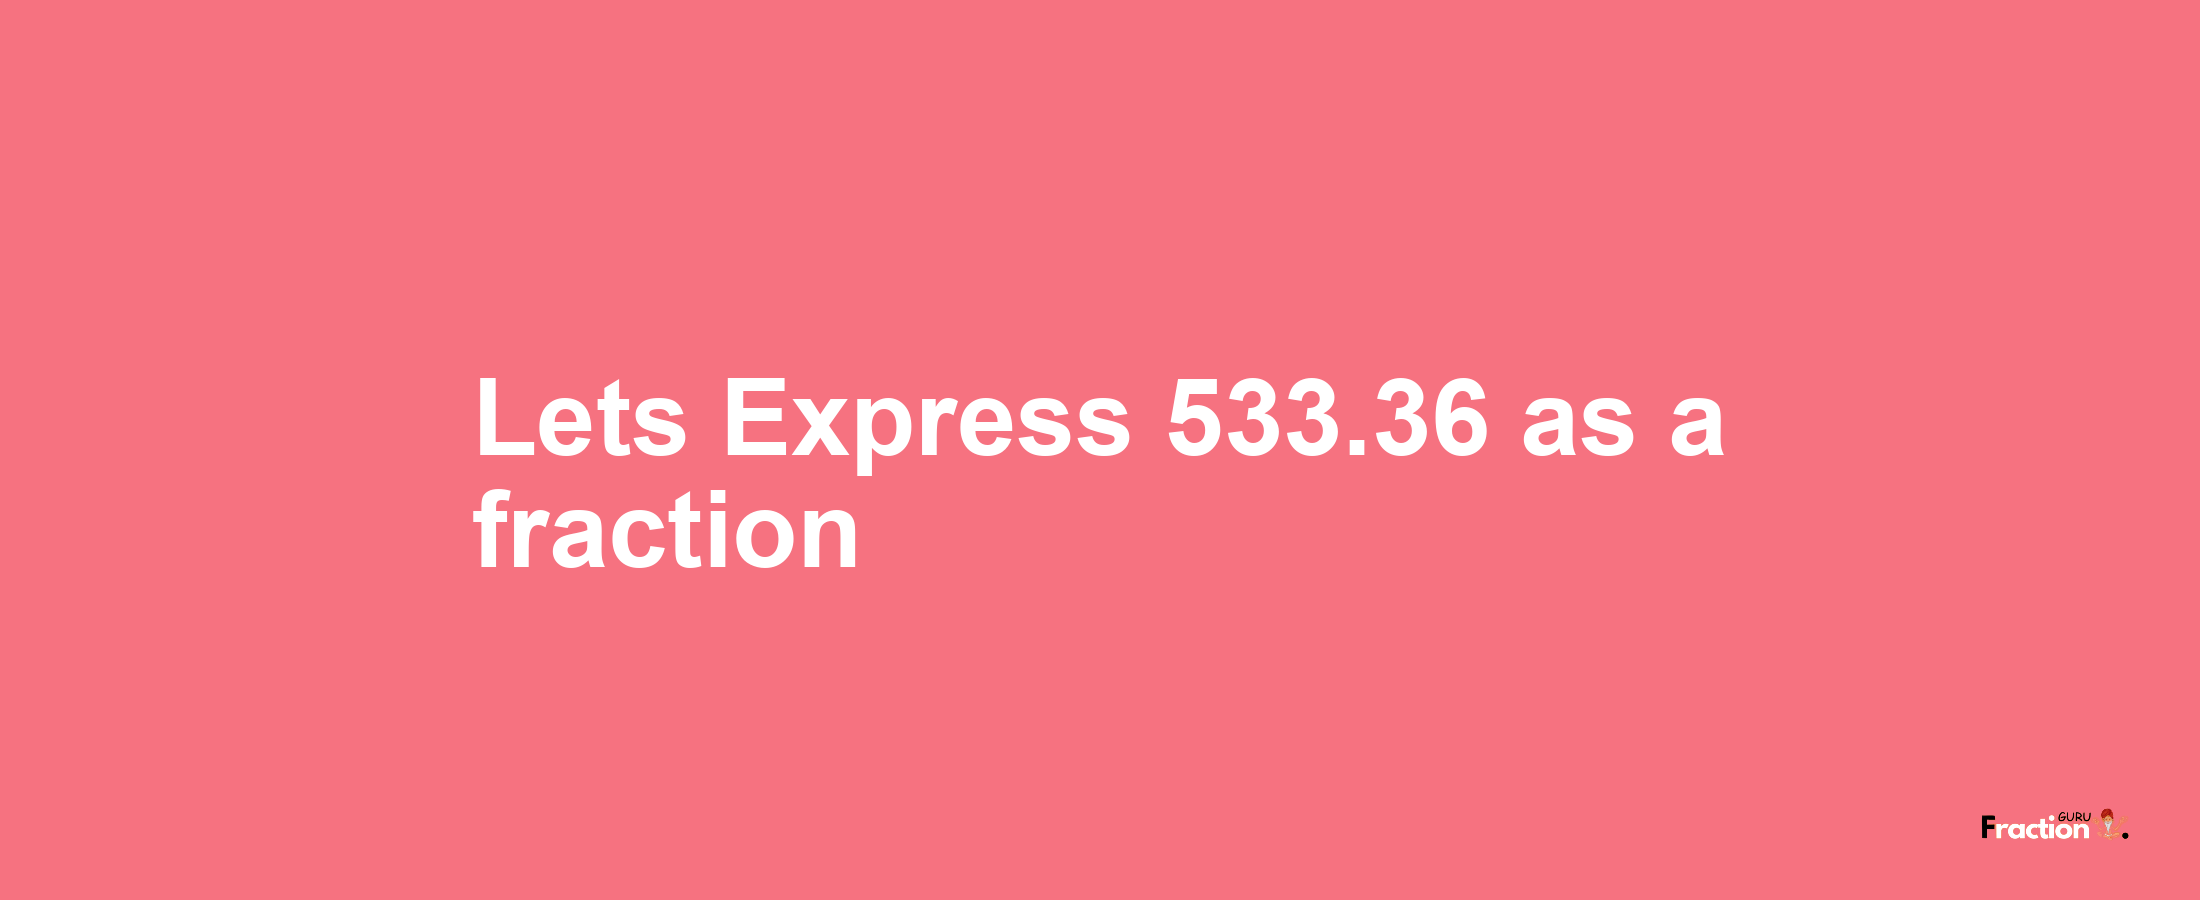 Lets Express 533.36 as afraction